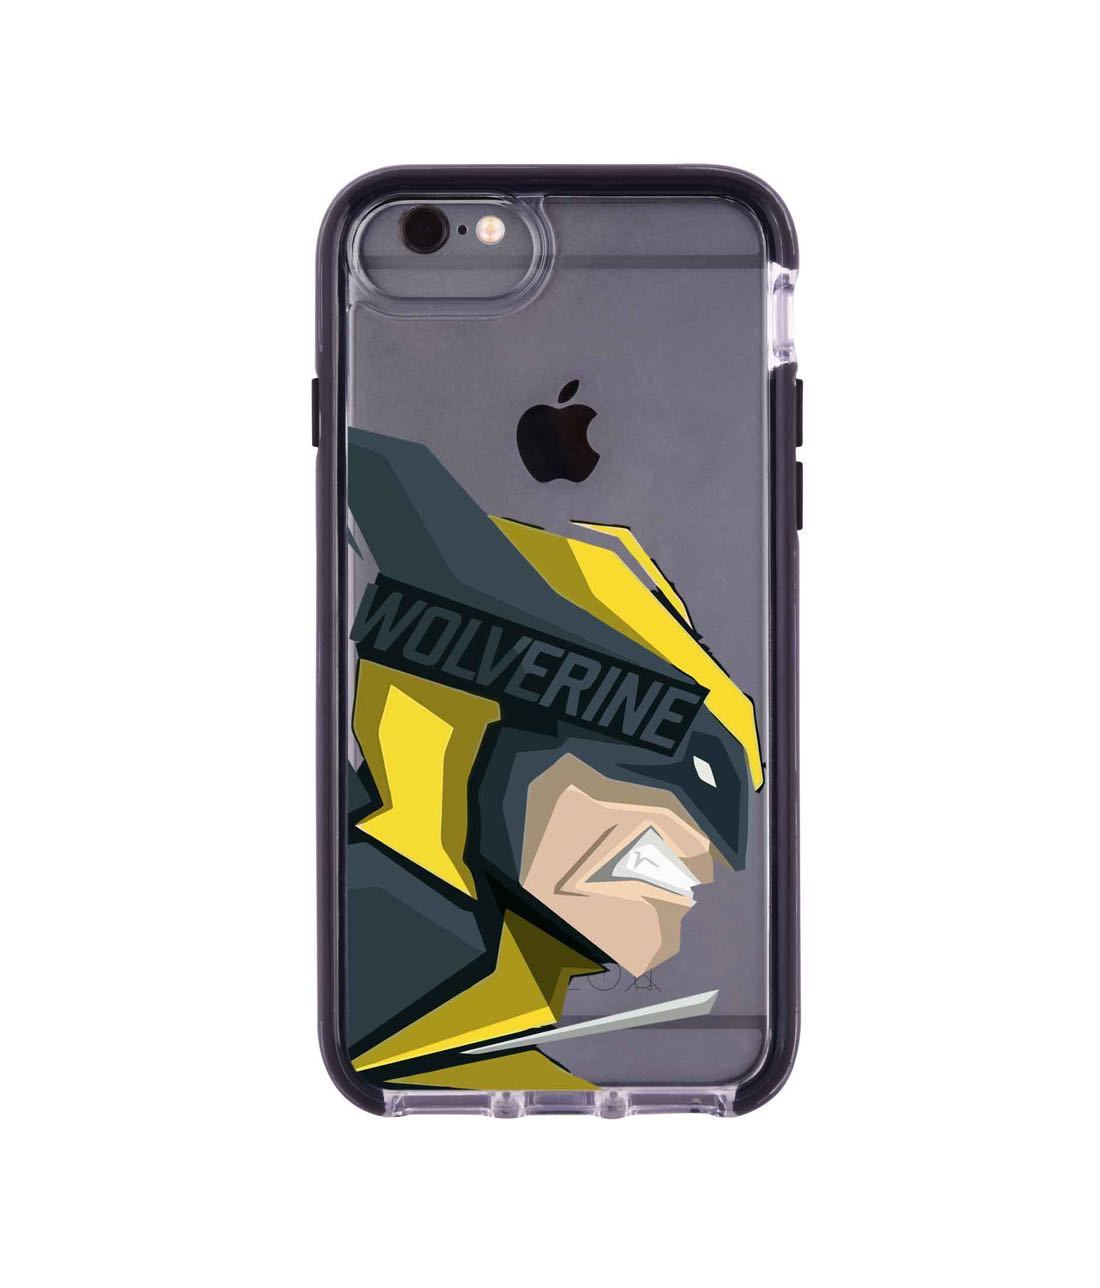 Dont Mess with Wolverine - Extreme Phone Case for iPhone 6S